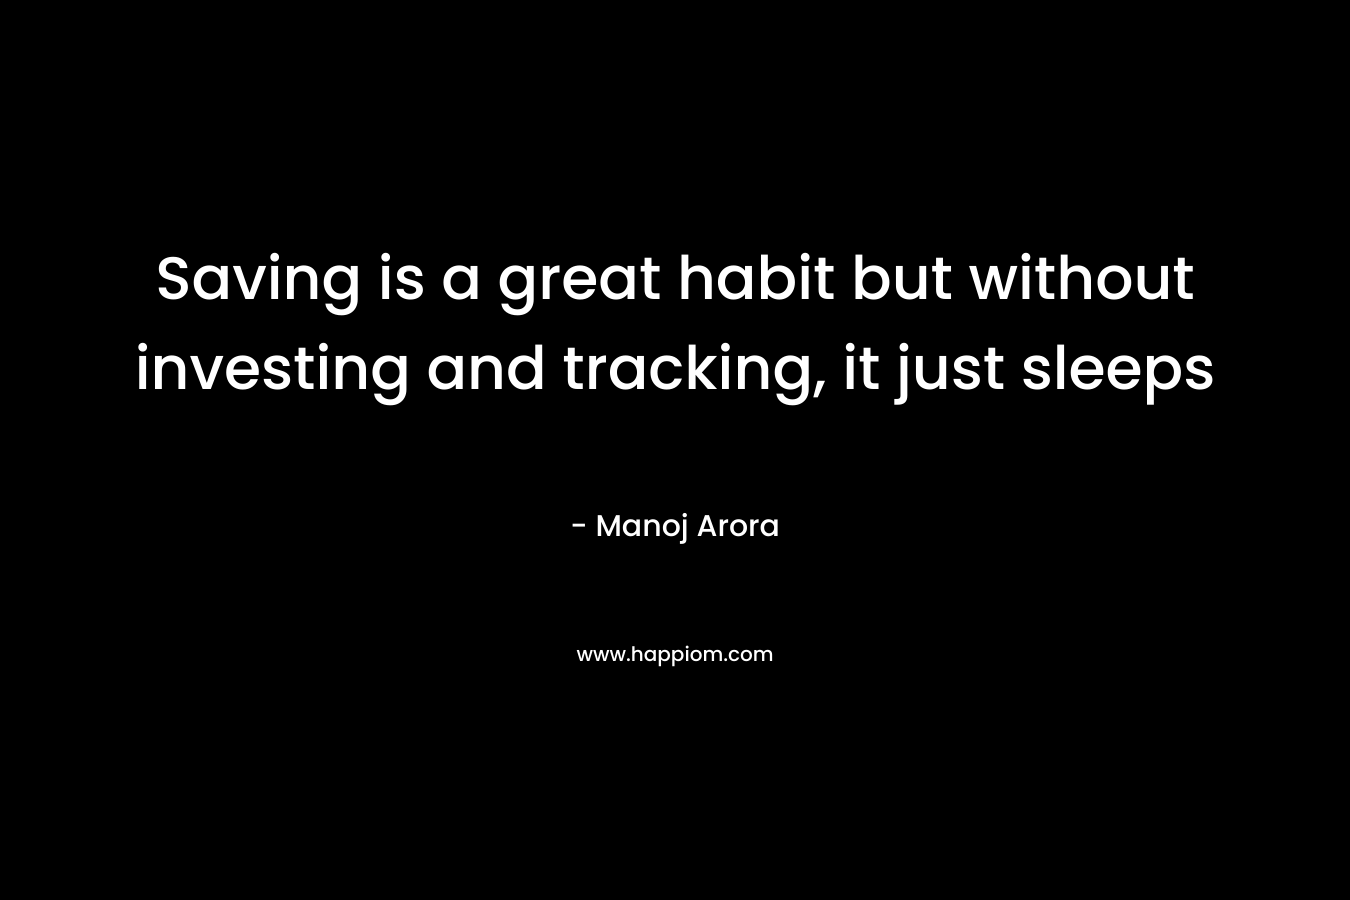 Saving is a great habit but without investing and tracking, it just sleeps – Manoj Arora